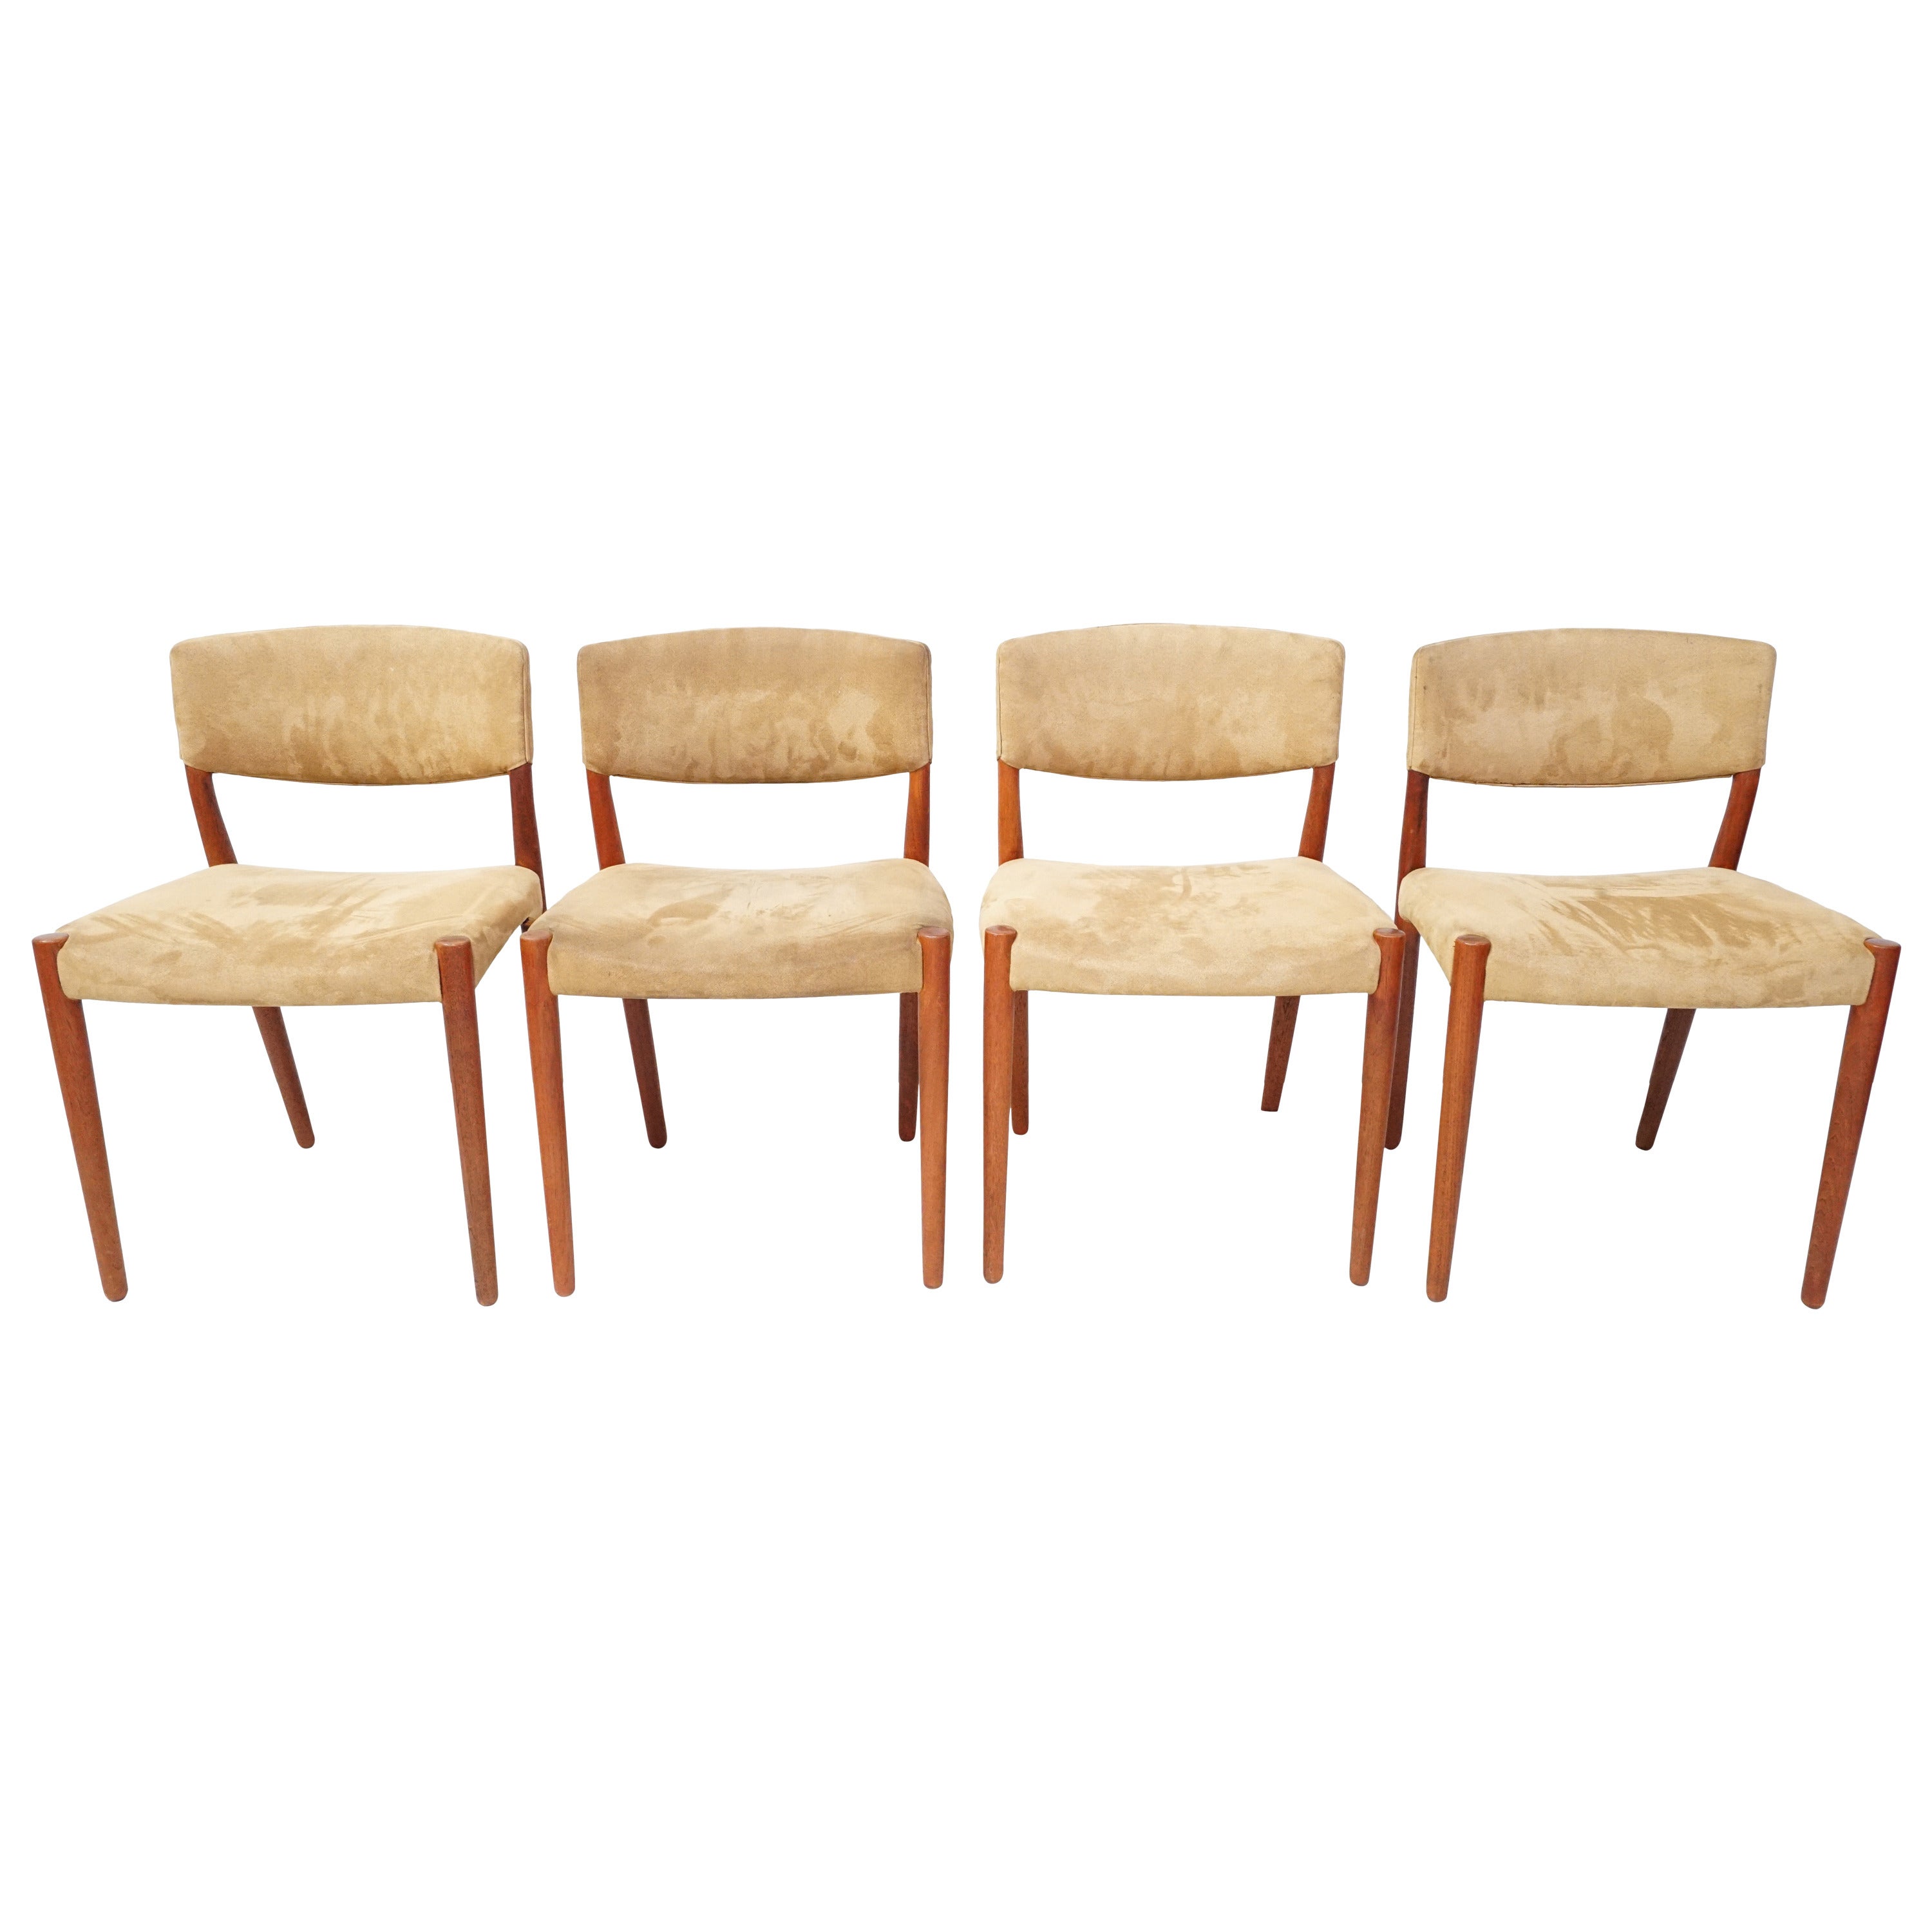 Four Einar Larsen & Bender Madsen Leather Dining Room Chairs For Sale